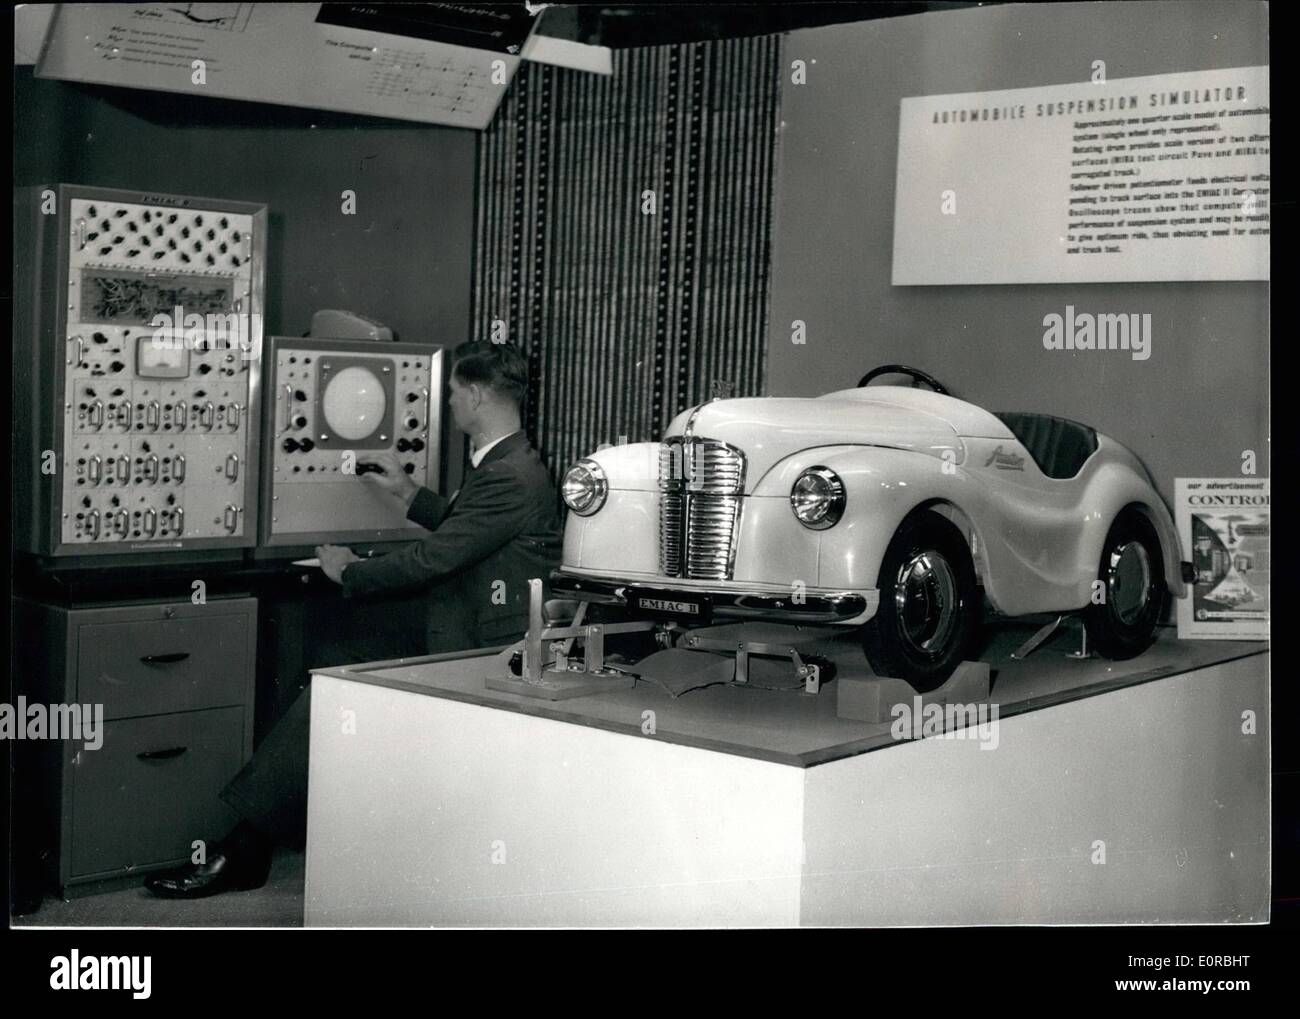 Nov. 28, 1958 - 28-11-58 Lord Mayor opens Electronic Computer Exhibition. The Lord Mayor of London, Sir Harold Gillett this morning opened the Electronic Computer Exhibition at Olympia. Keystone Photo Shows: An operator at the panel controls the Automobile Suspension Simulator, on a model at the exhibition. The quarter scale model shows how E.M.I.A.C.II computer can be used to test car suspension system under varying road conditions. Stock Photo